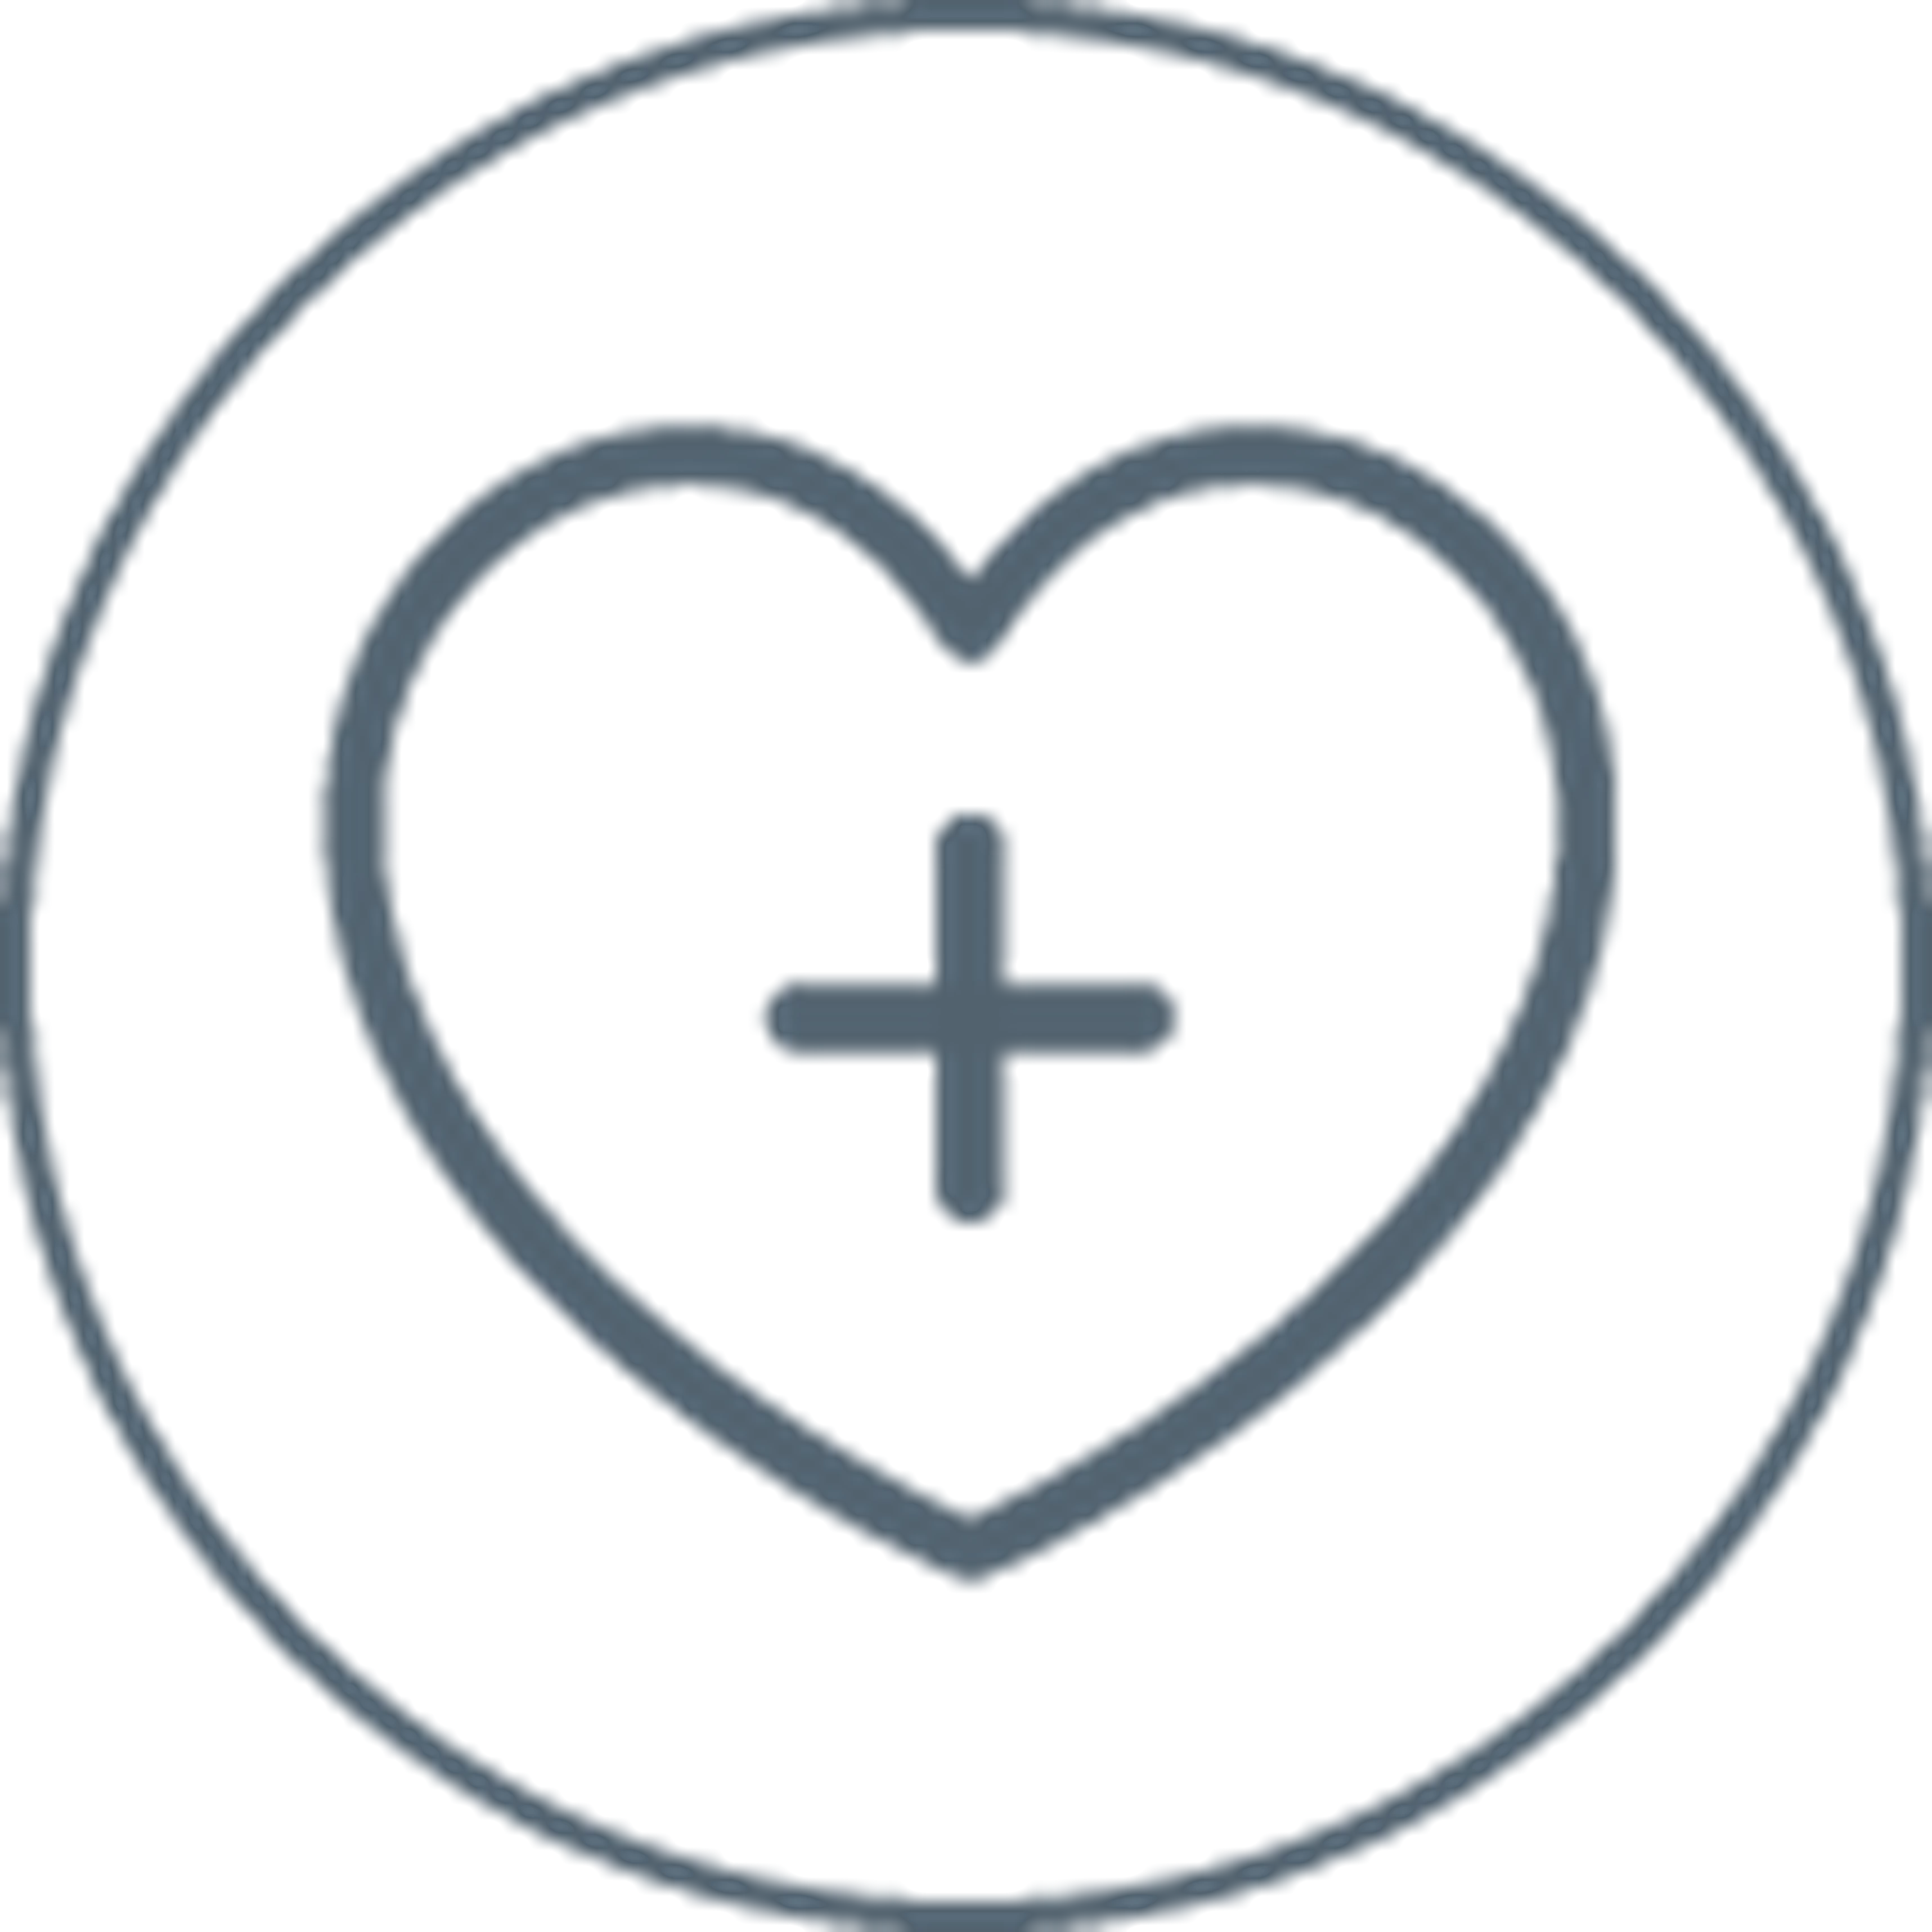 Outline-icon-128x128px-Heart.png